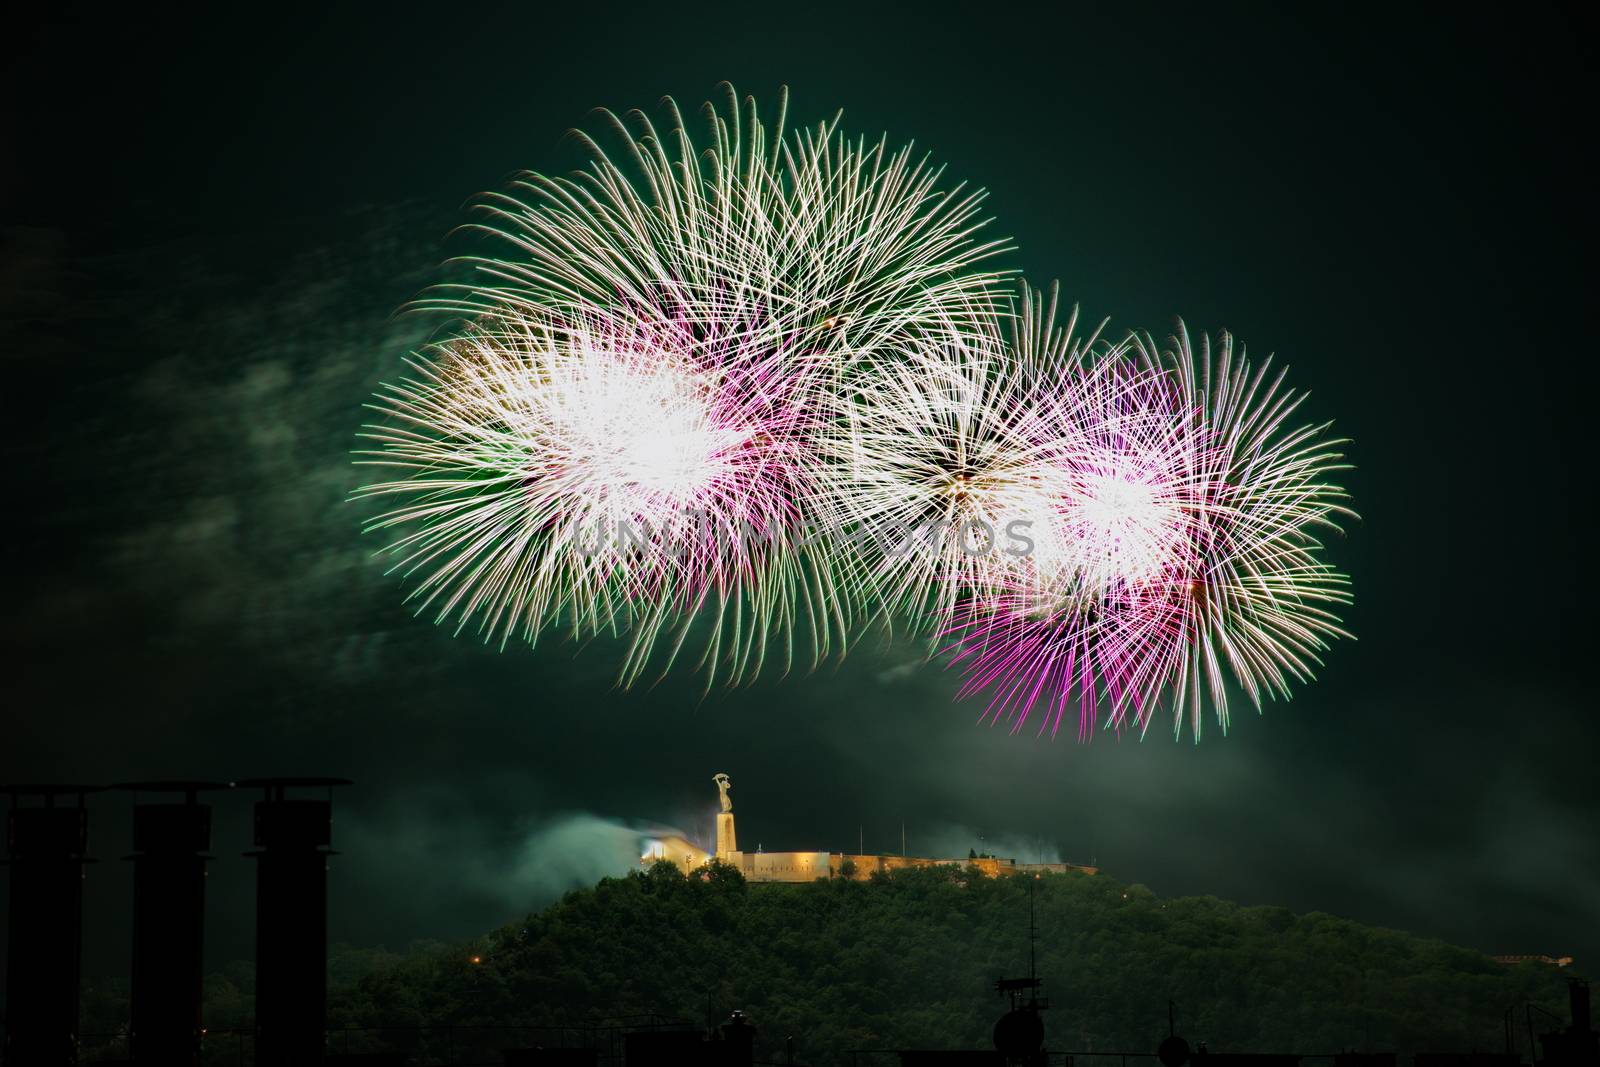 Fireworks over Liberty statue in Budapest, Hungary